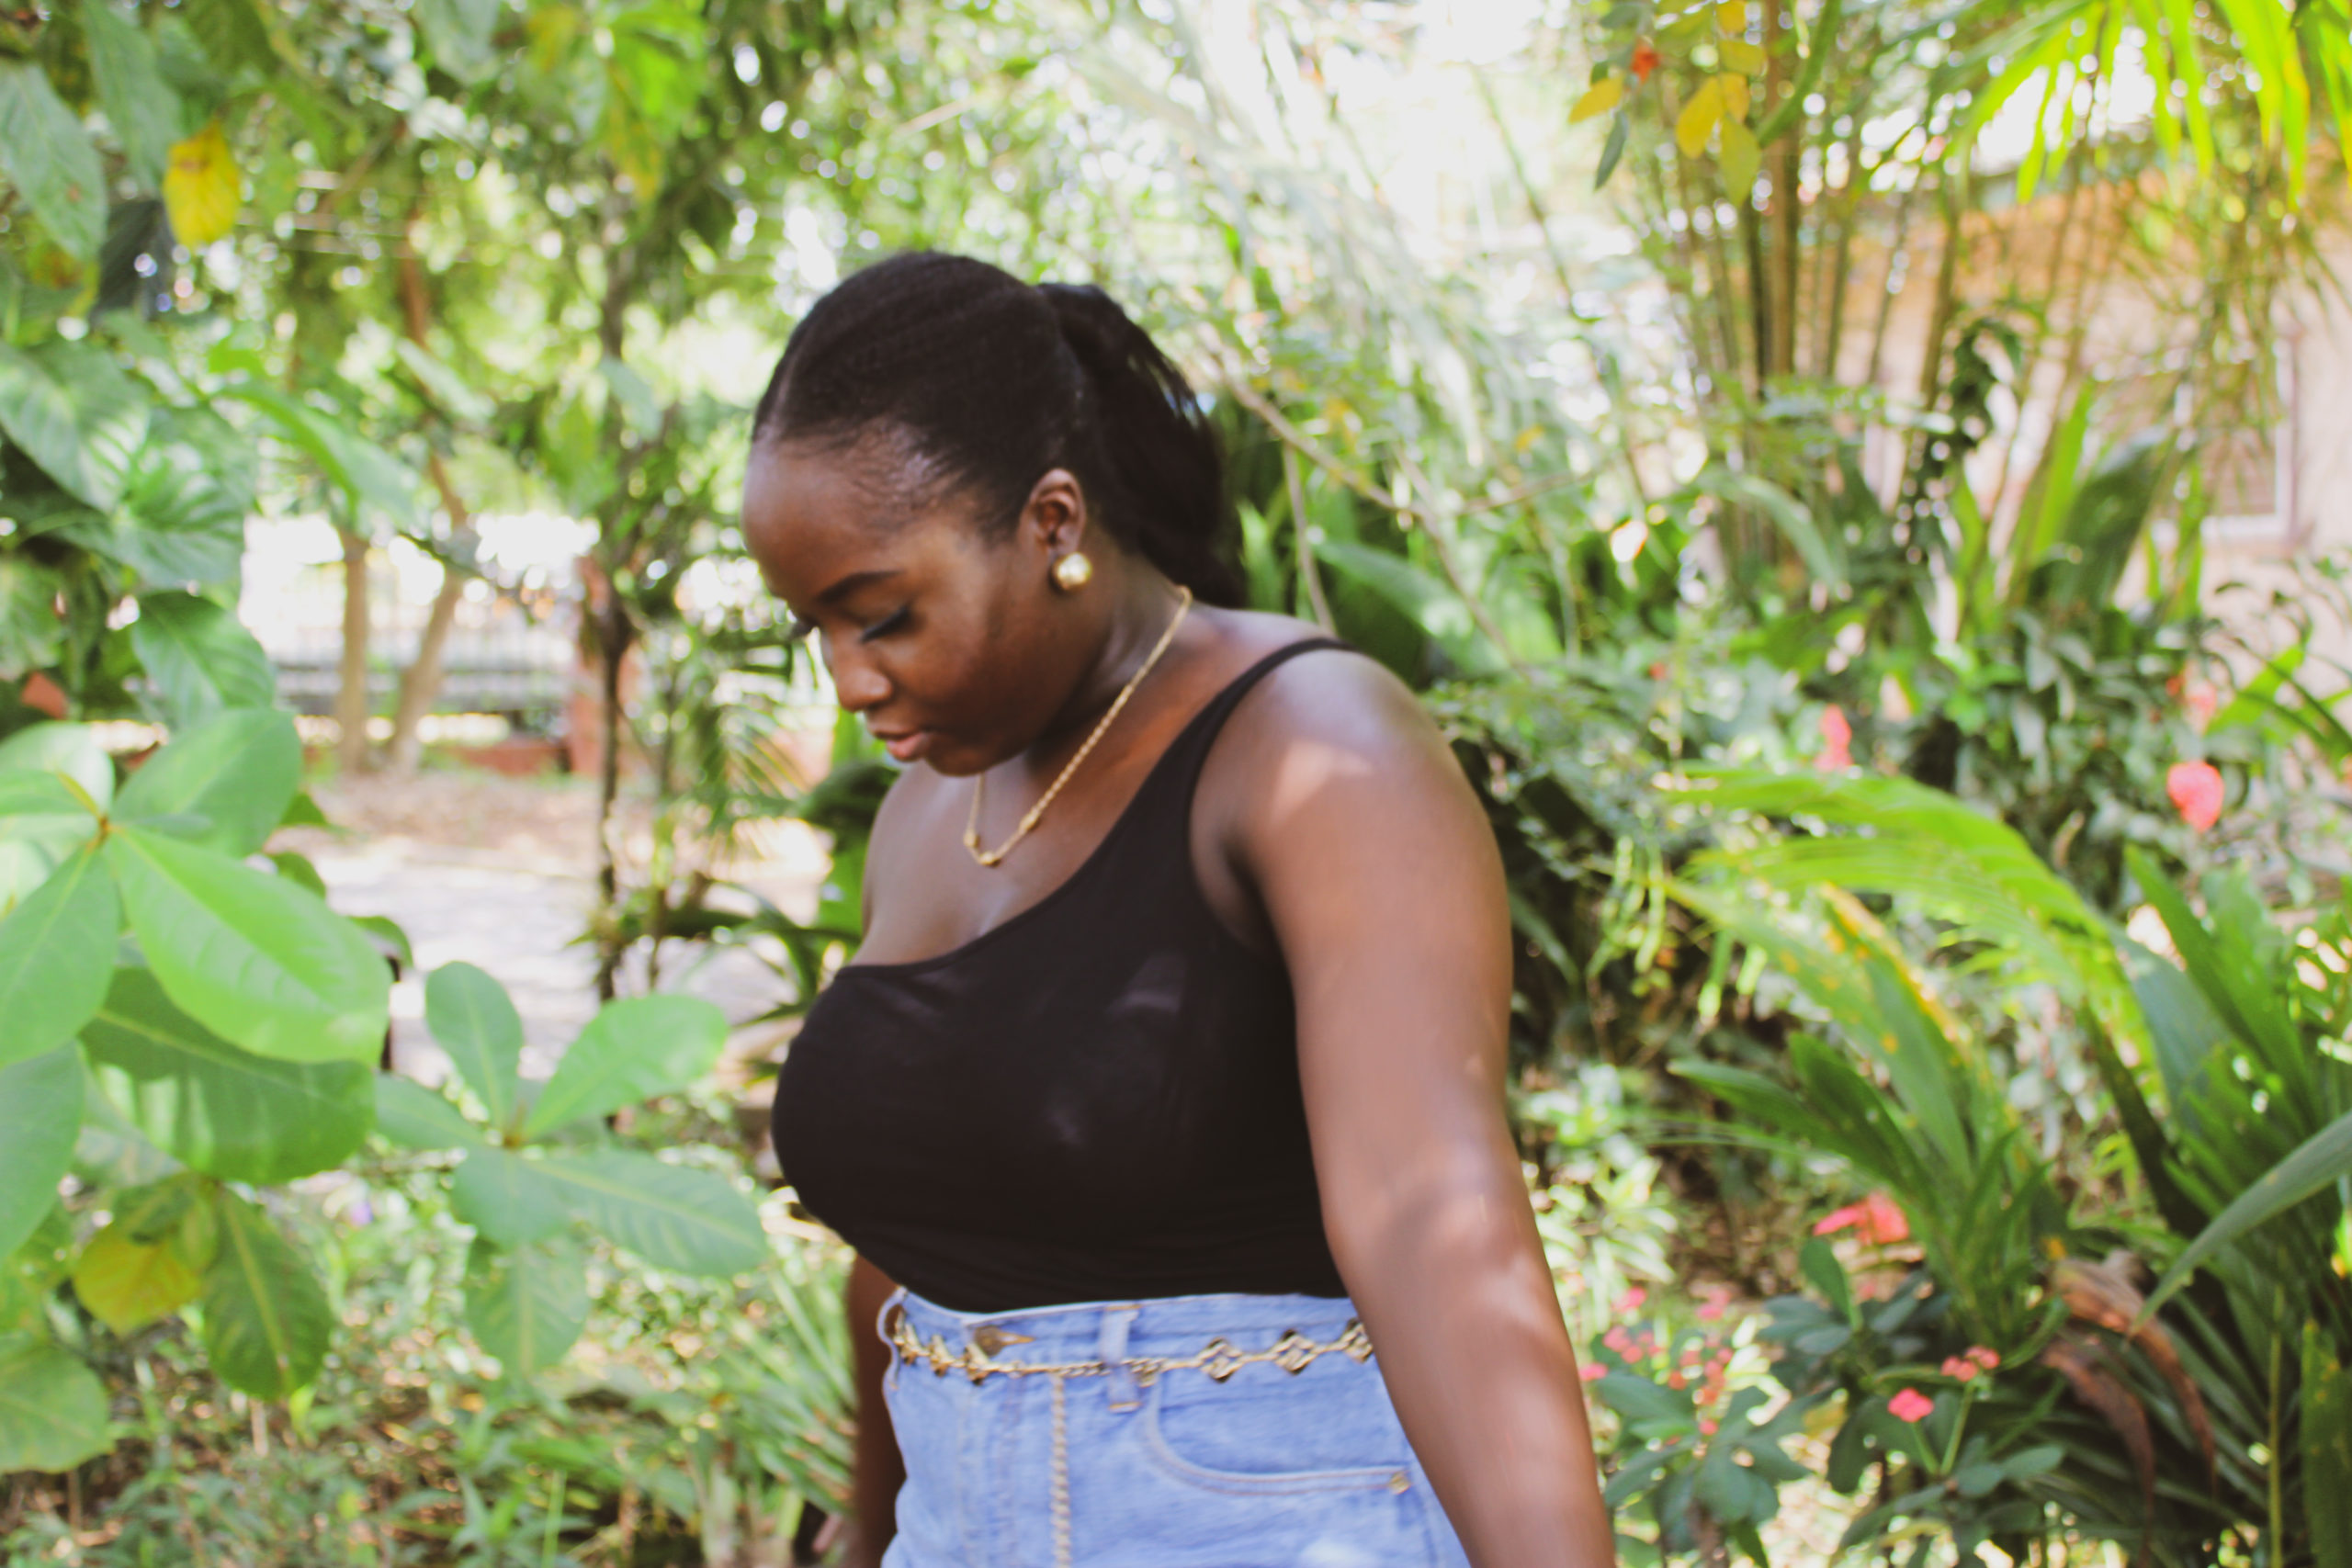 Music Marketer Benewaah Boateng [@stingg_] shares her determination to amplify rare gems in the African music industry